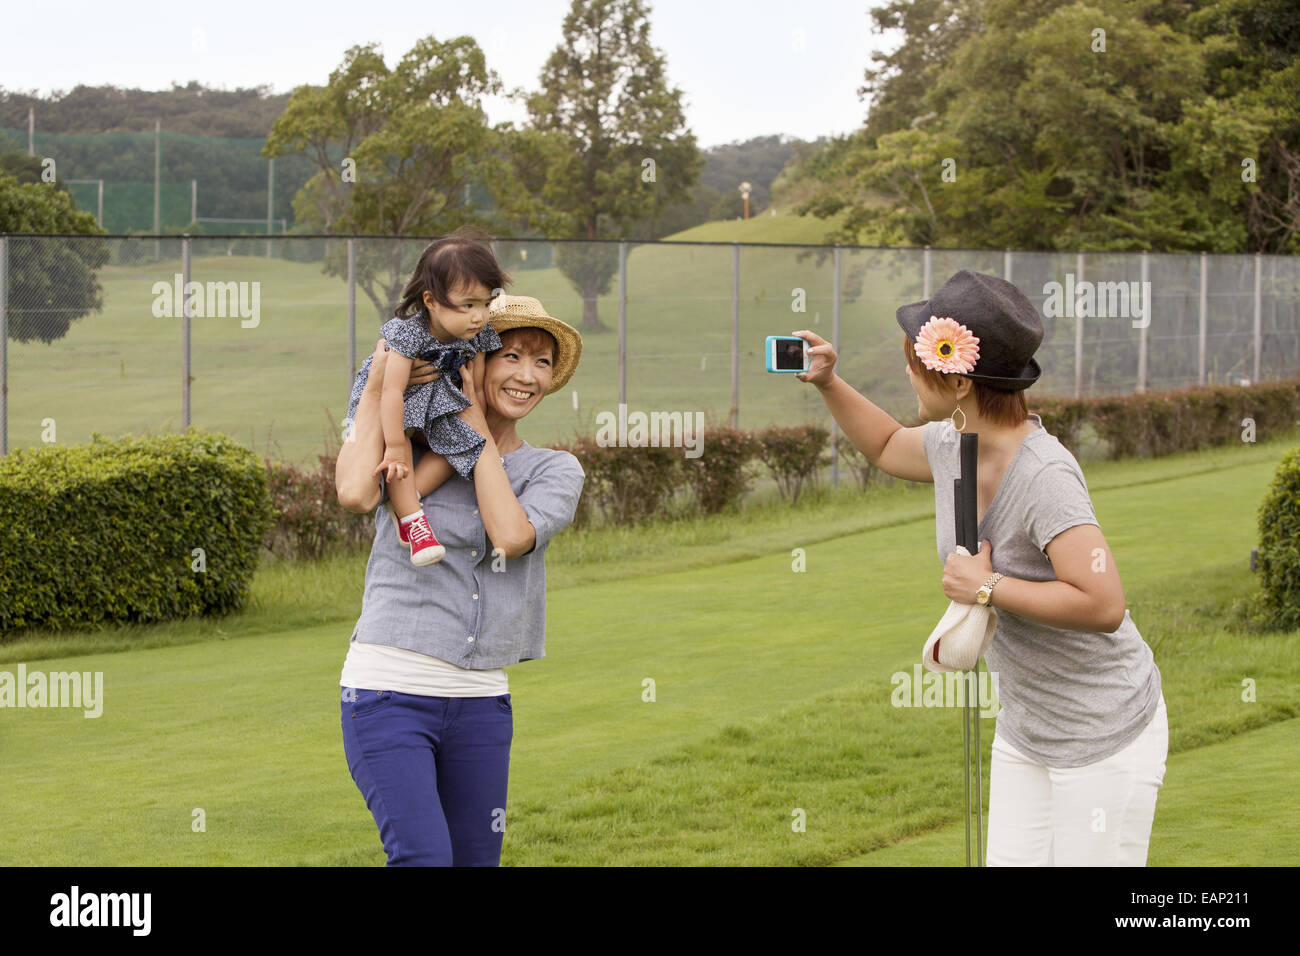 Family on a golf course. A woman using a camera. Stock Photo